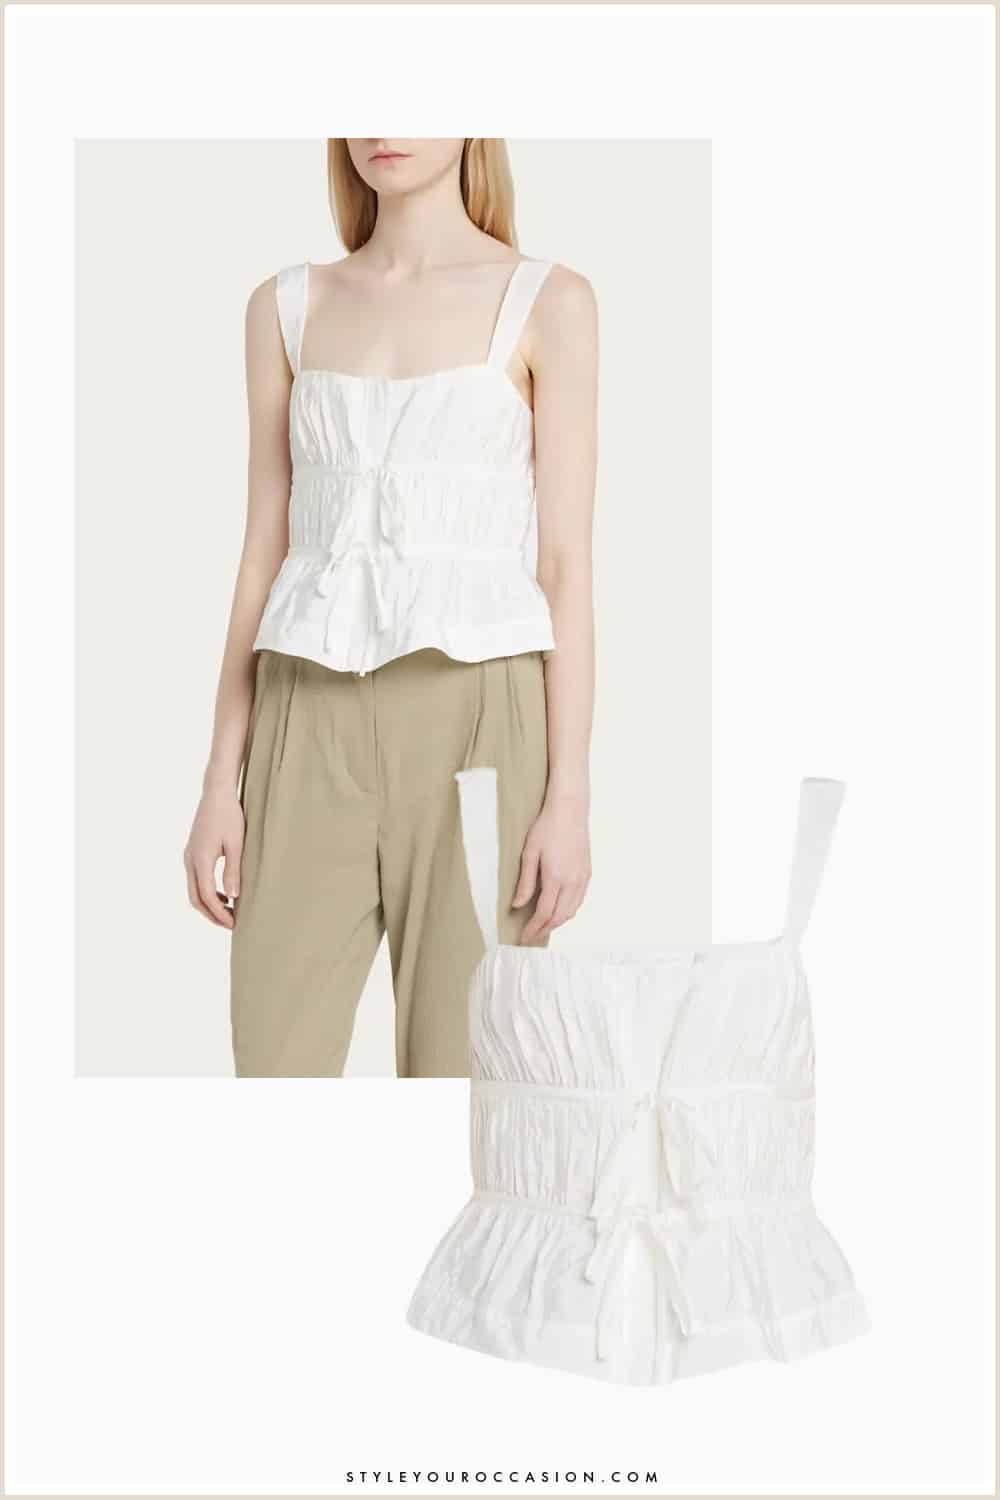 image of a white peplum tank top from Bergdorf Goodman sale with a model wearing the top